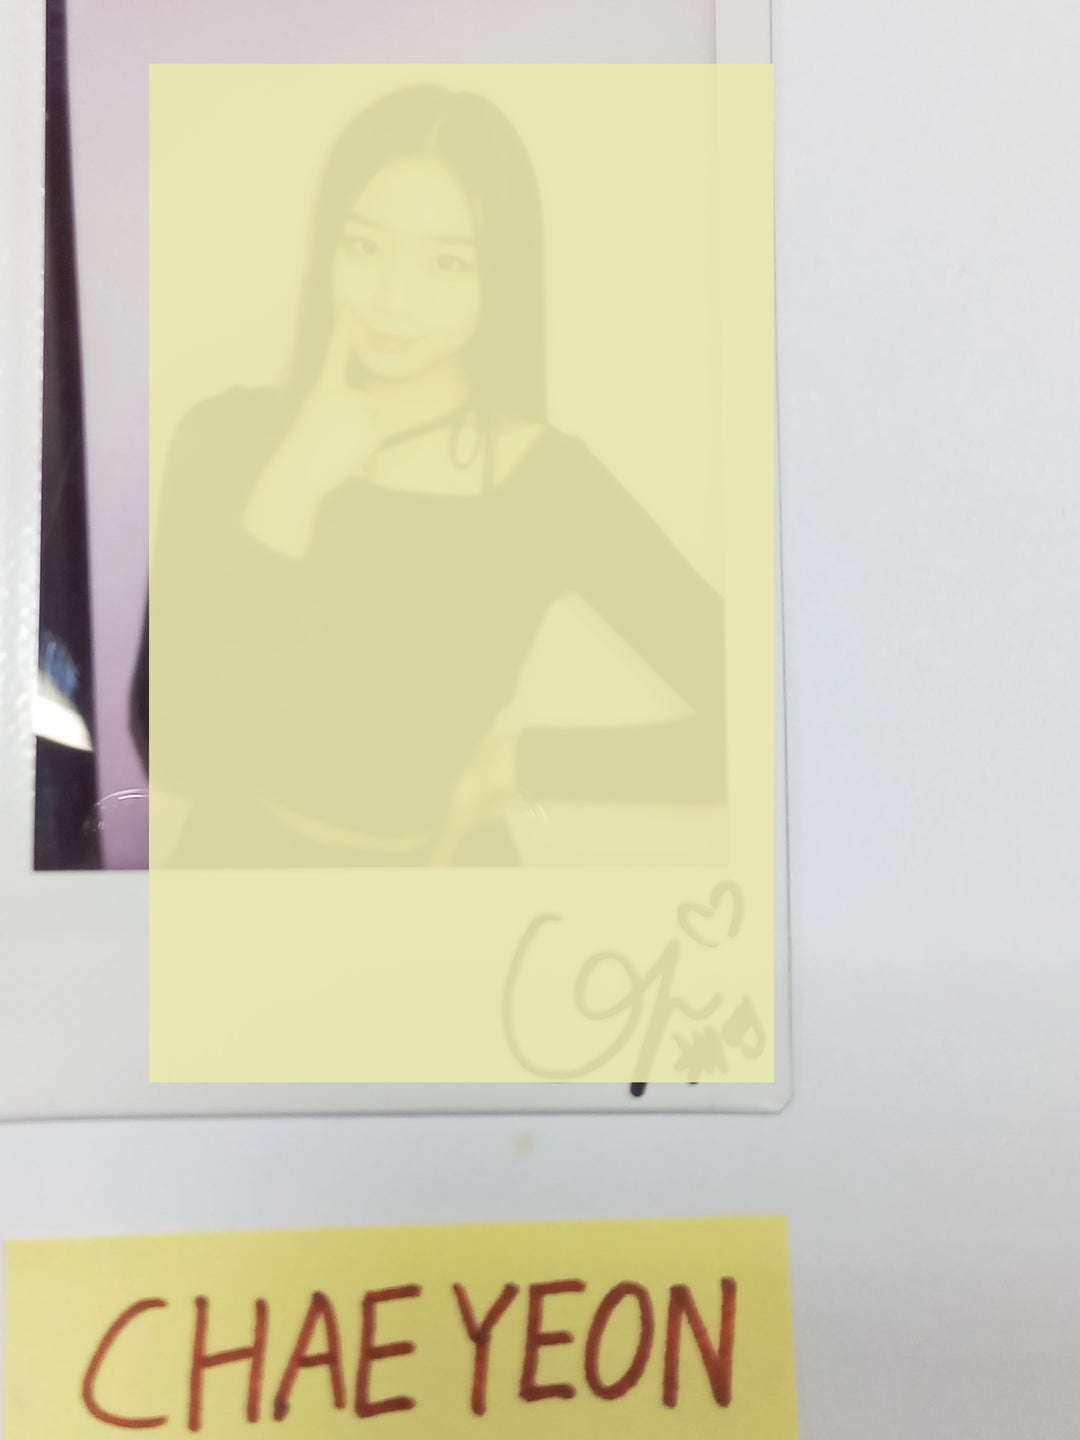 Chae Yeon (Of (KR)ystal Eyes) "AESTHETIC" - Hand Autographed(Signed) Polaroid